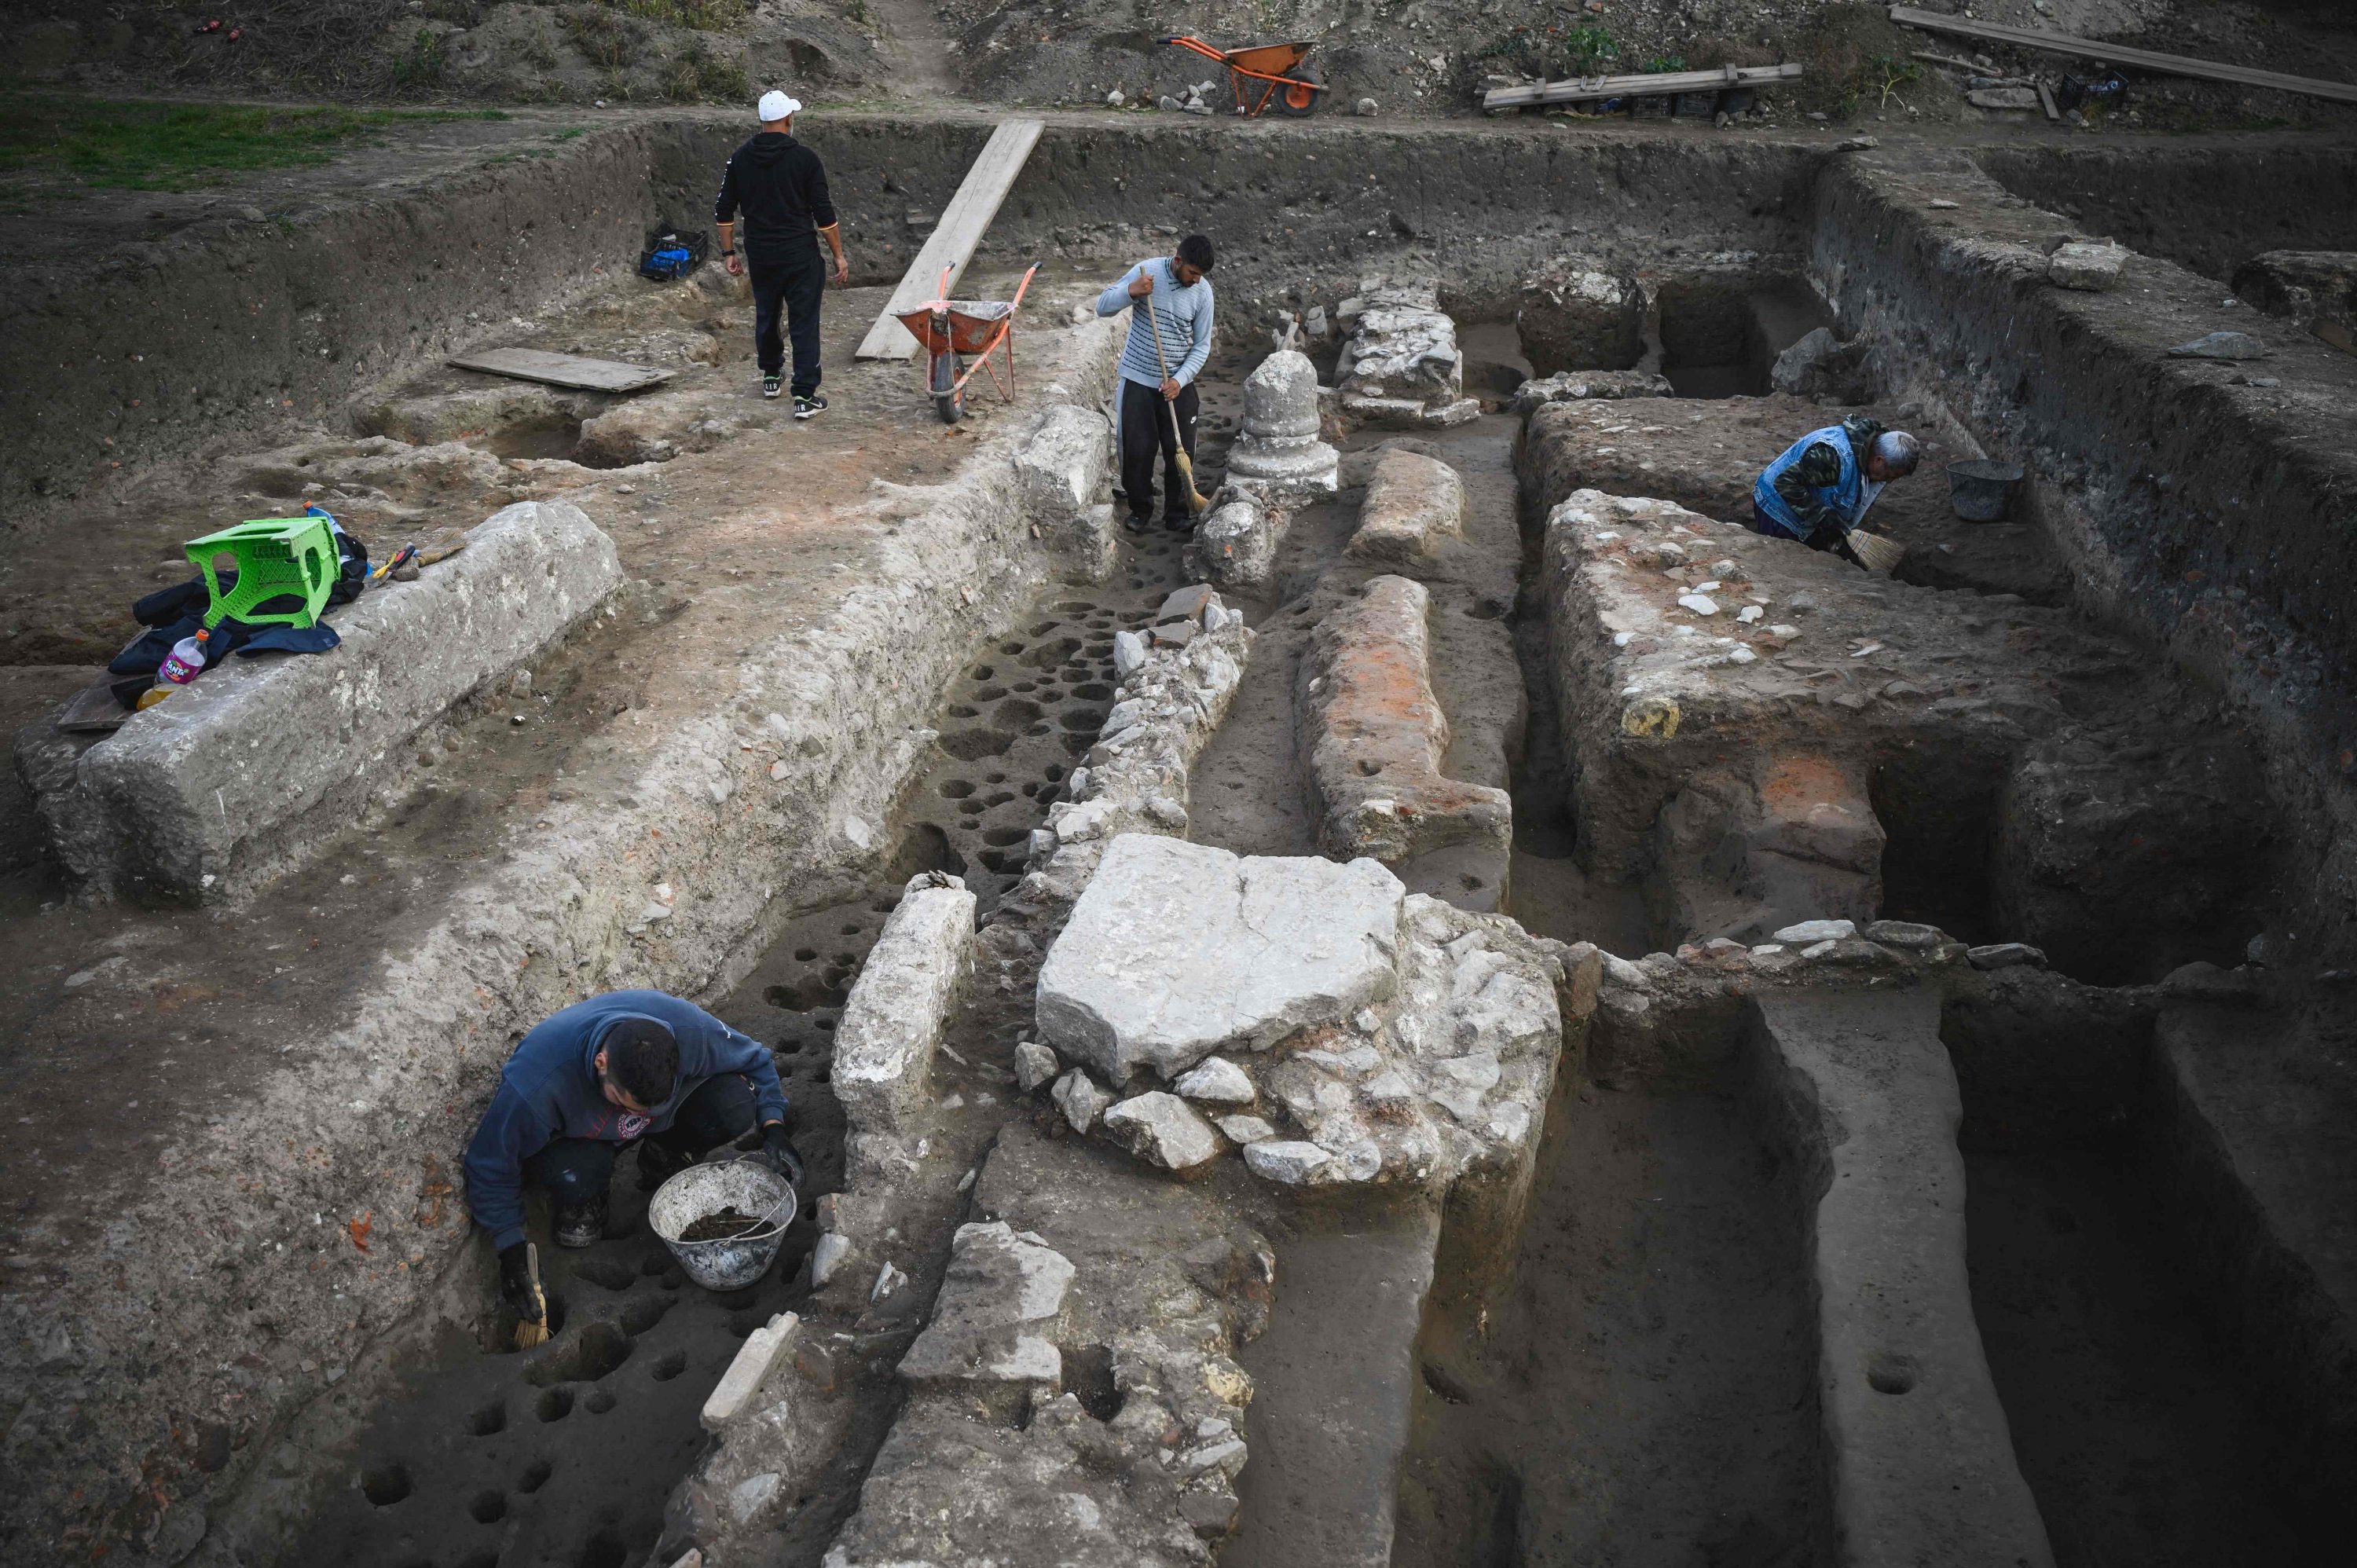 Archeologists work at an archaeological site right next to a coal mine and a power plant, in Stari Kostolac, Serbia on Dec. 3, 2021. (AFP Photo)